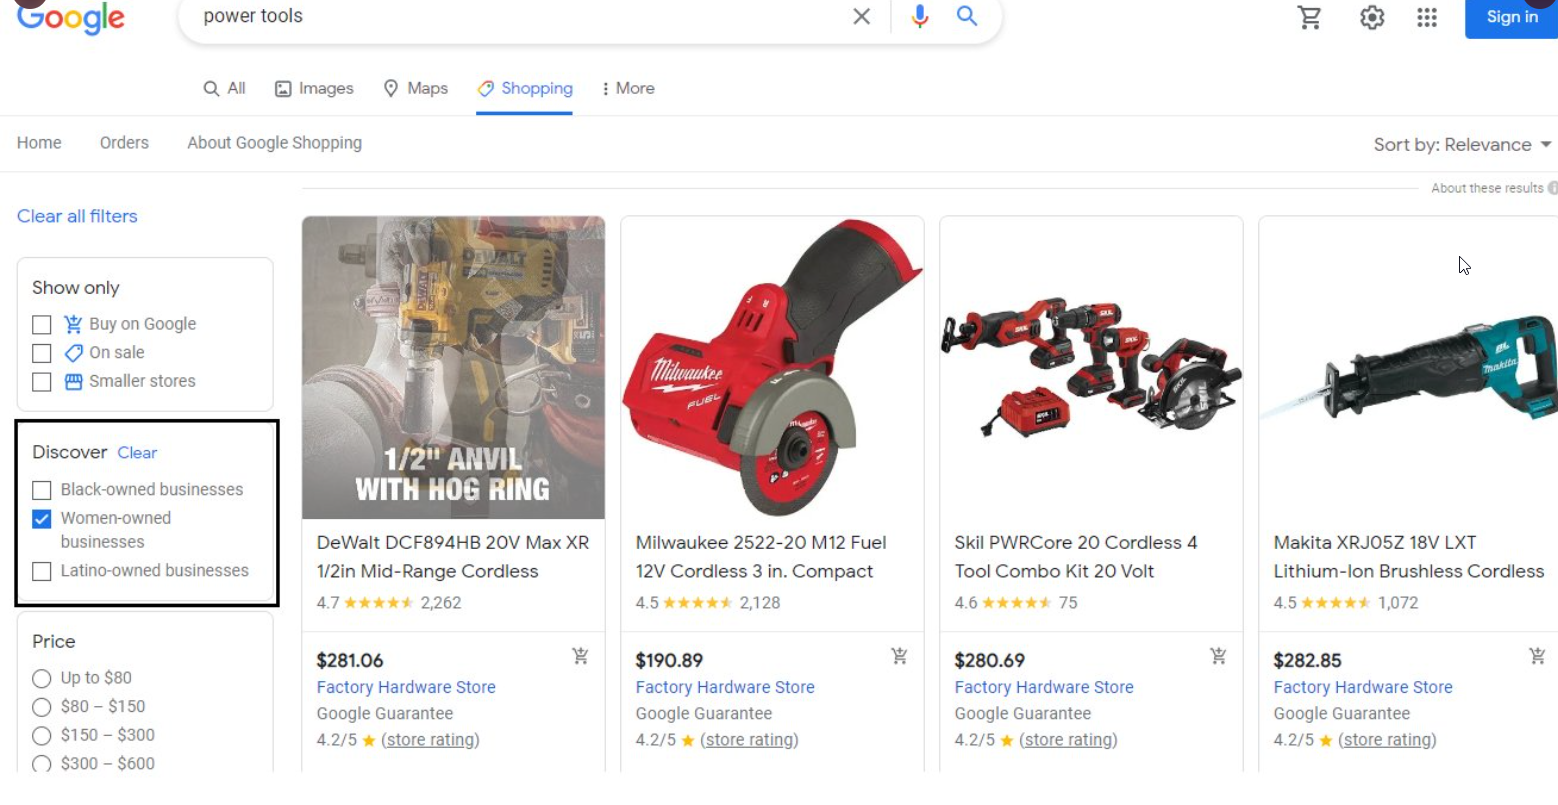 Google Shopping Search Discover Filter For Black, Women, Veteran & Latino Owned Businesses